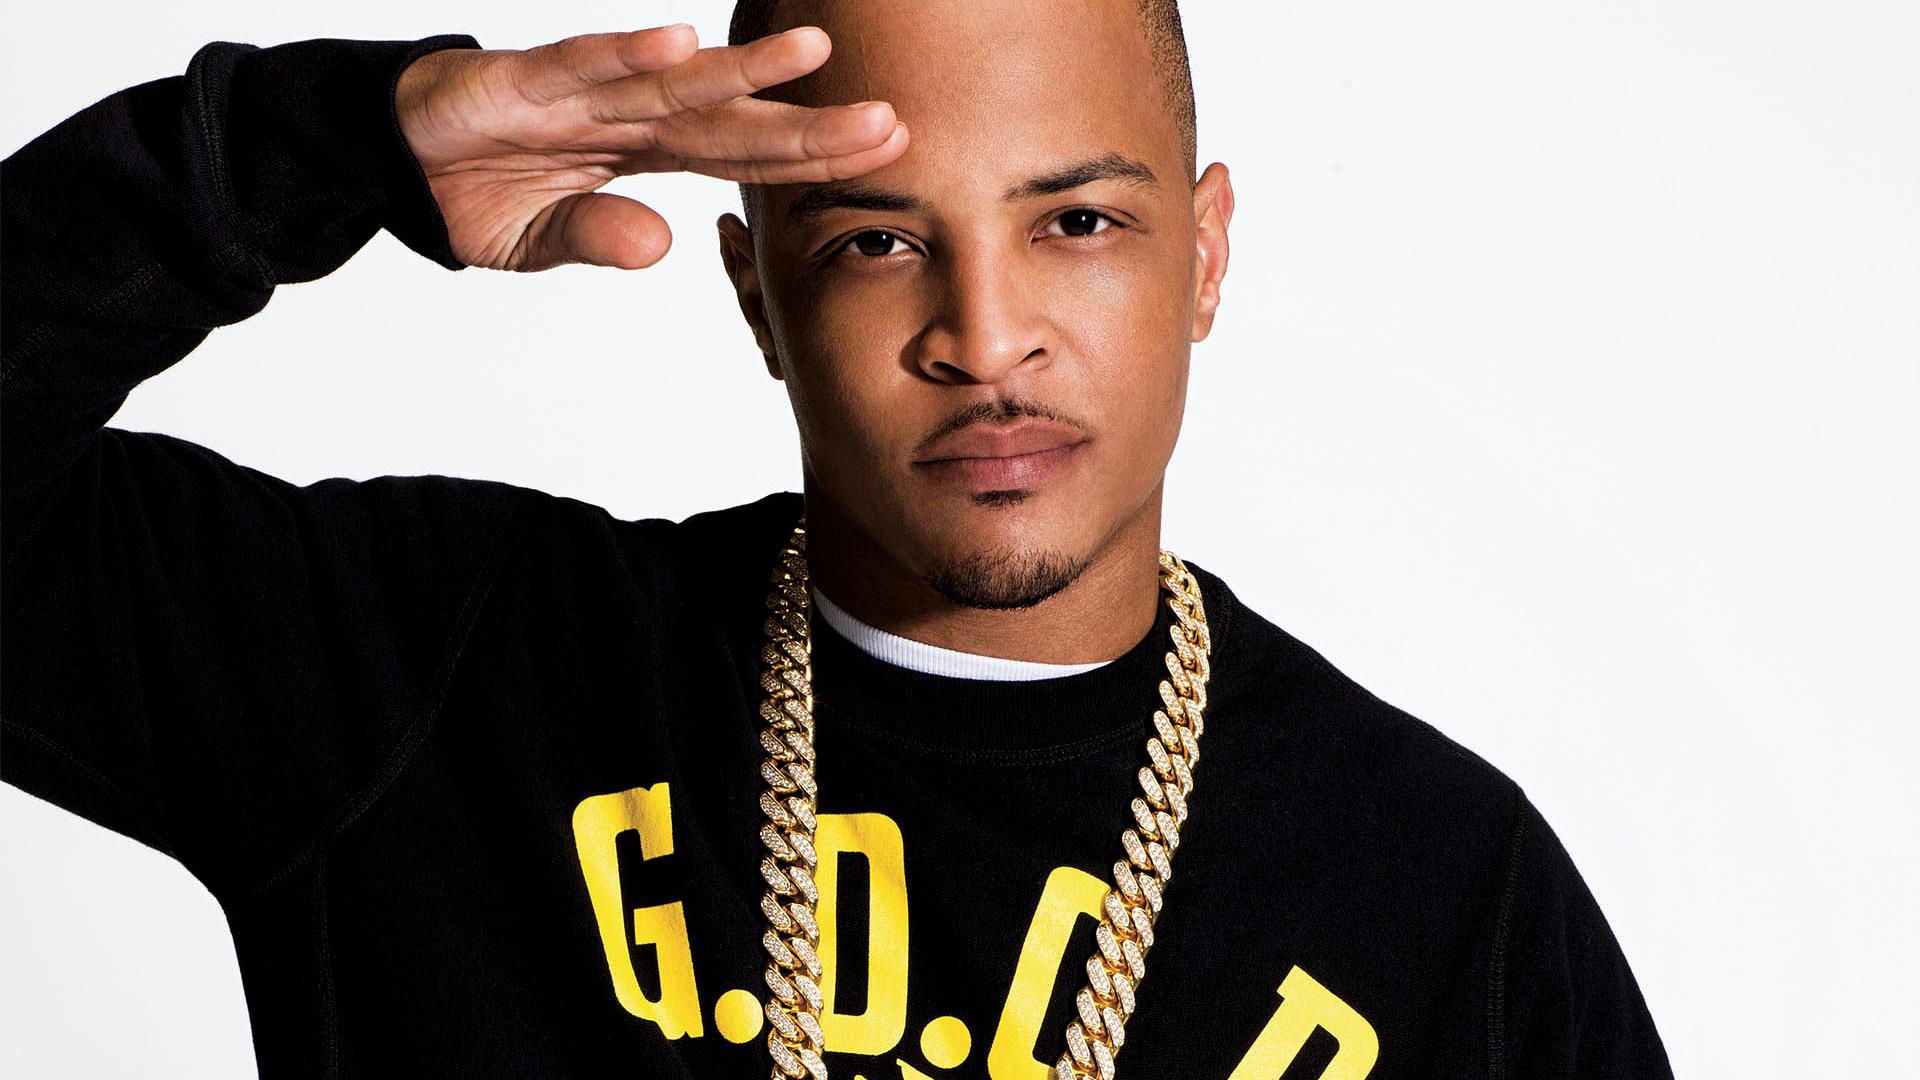 TI Rapper HD Wallpapers and Backgrounds